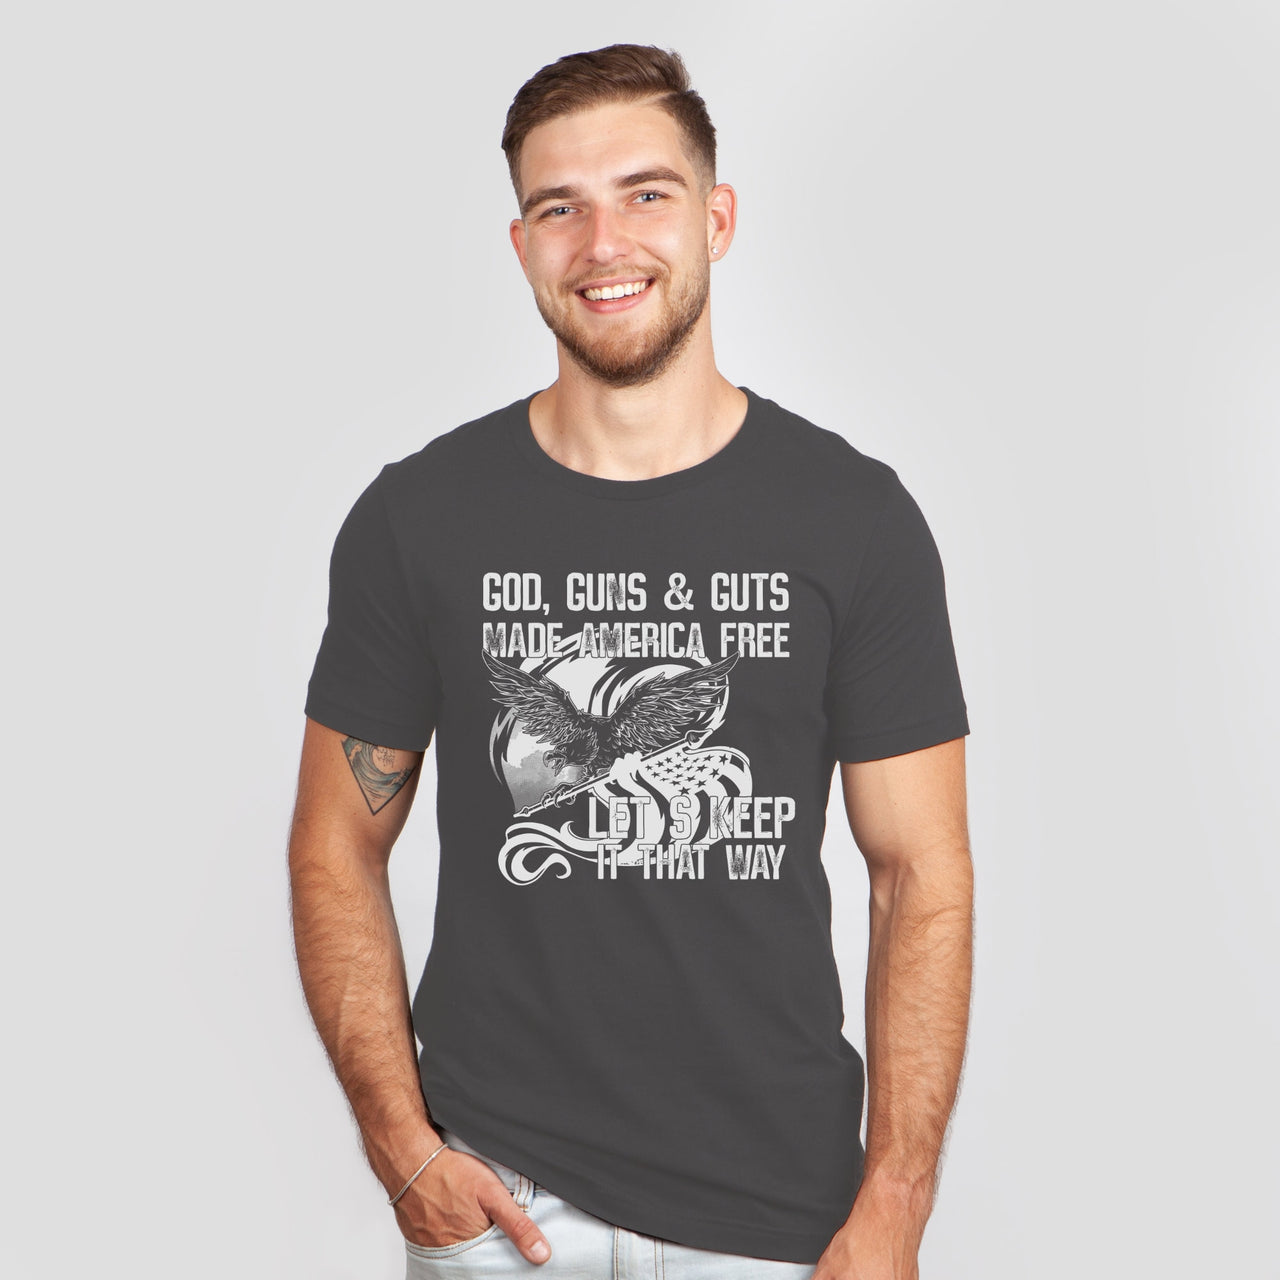 Gods, Guns & Guts Made America Free Eagles Let's Keep It That Way Tee